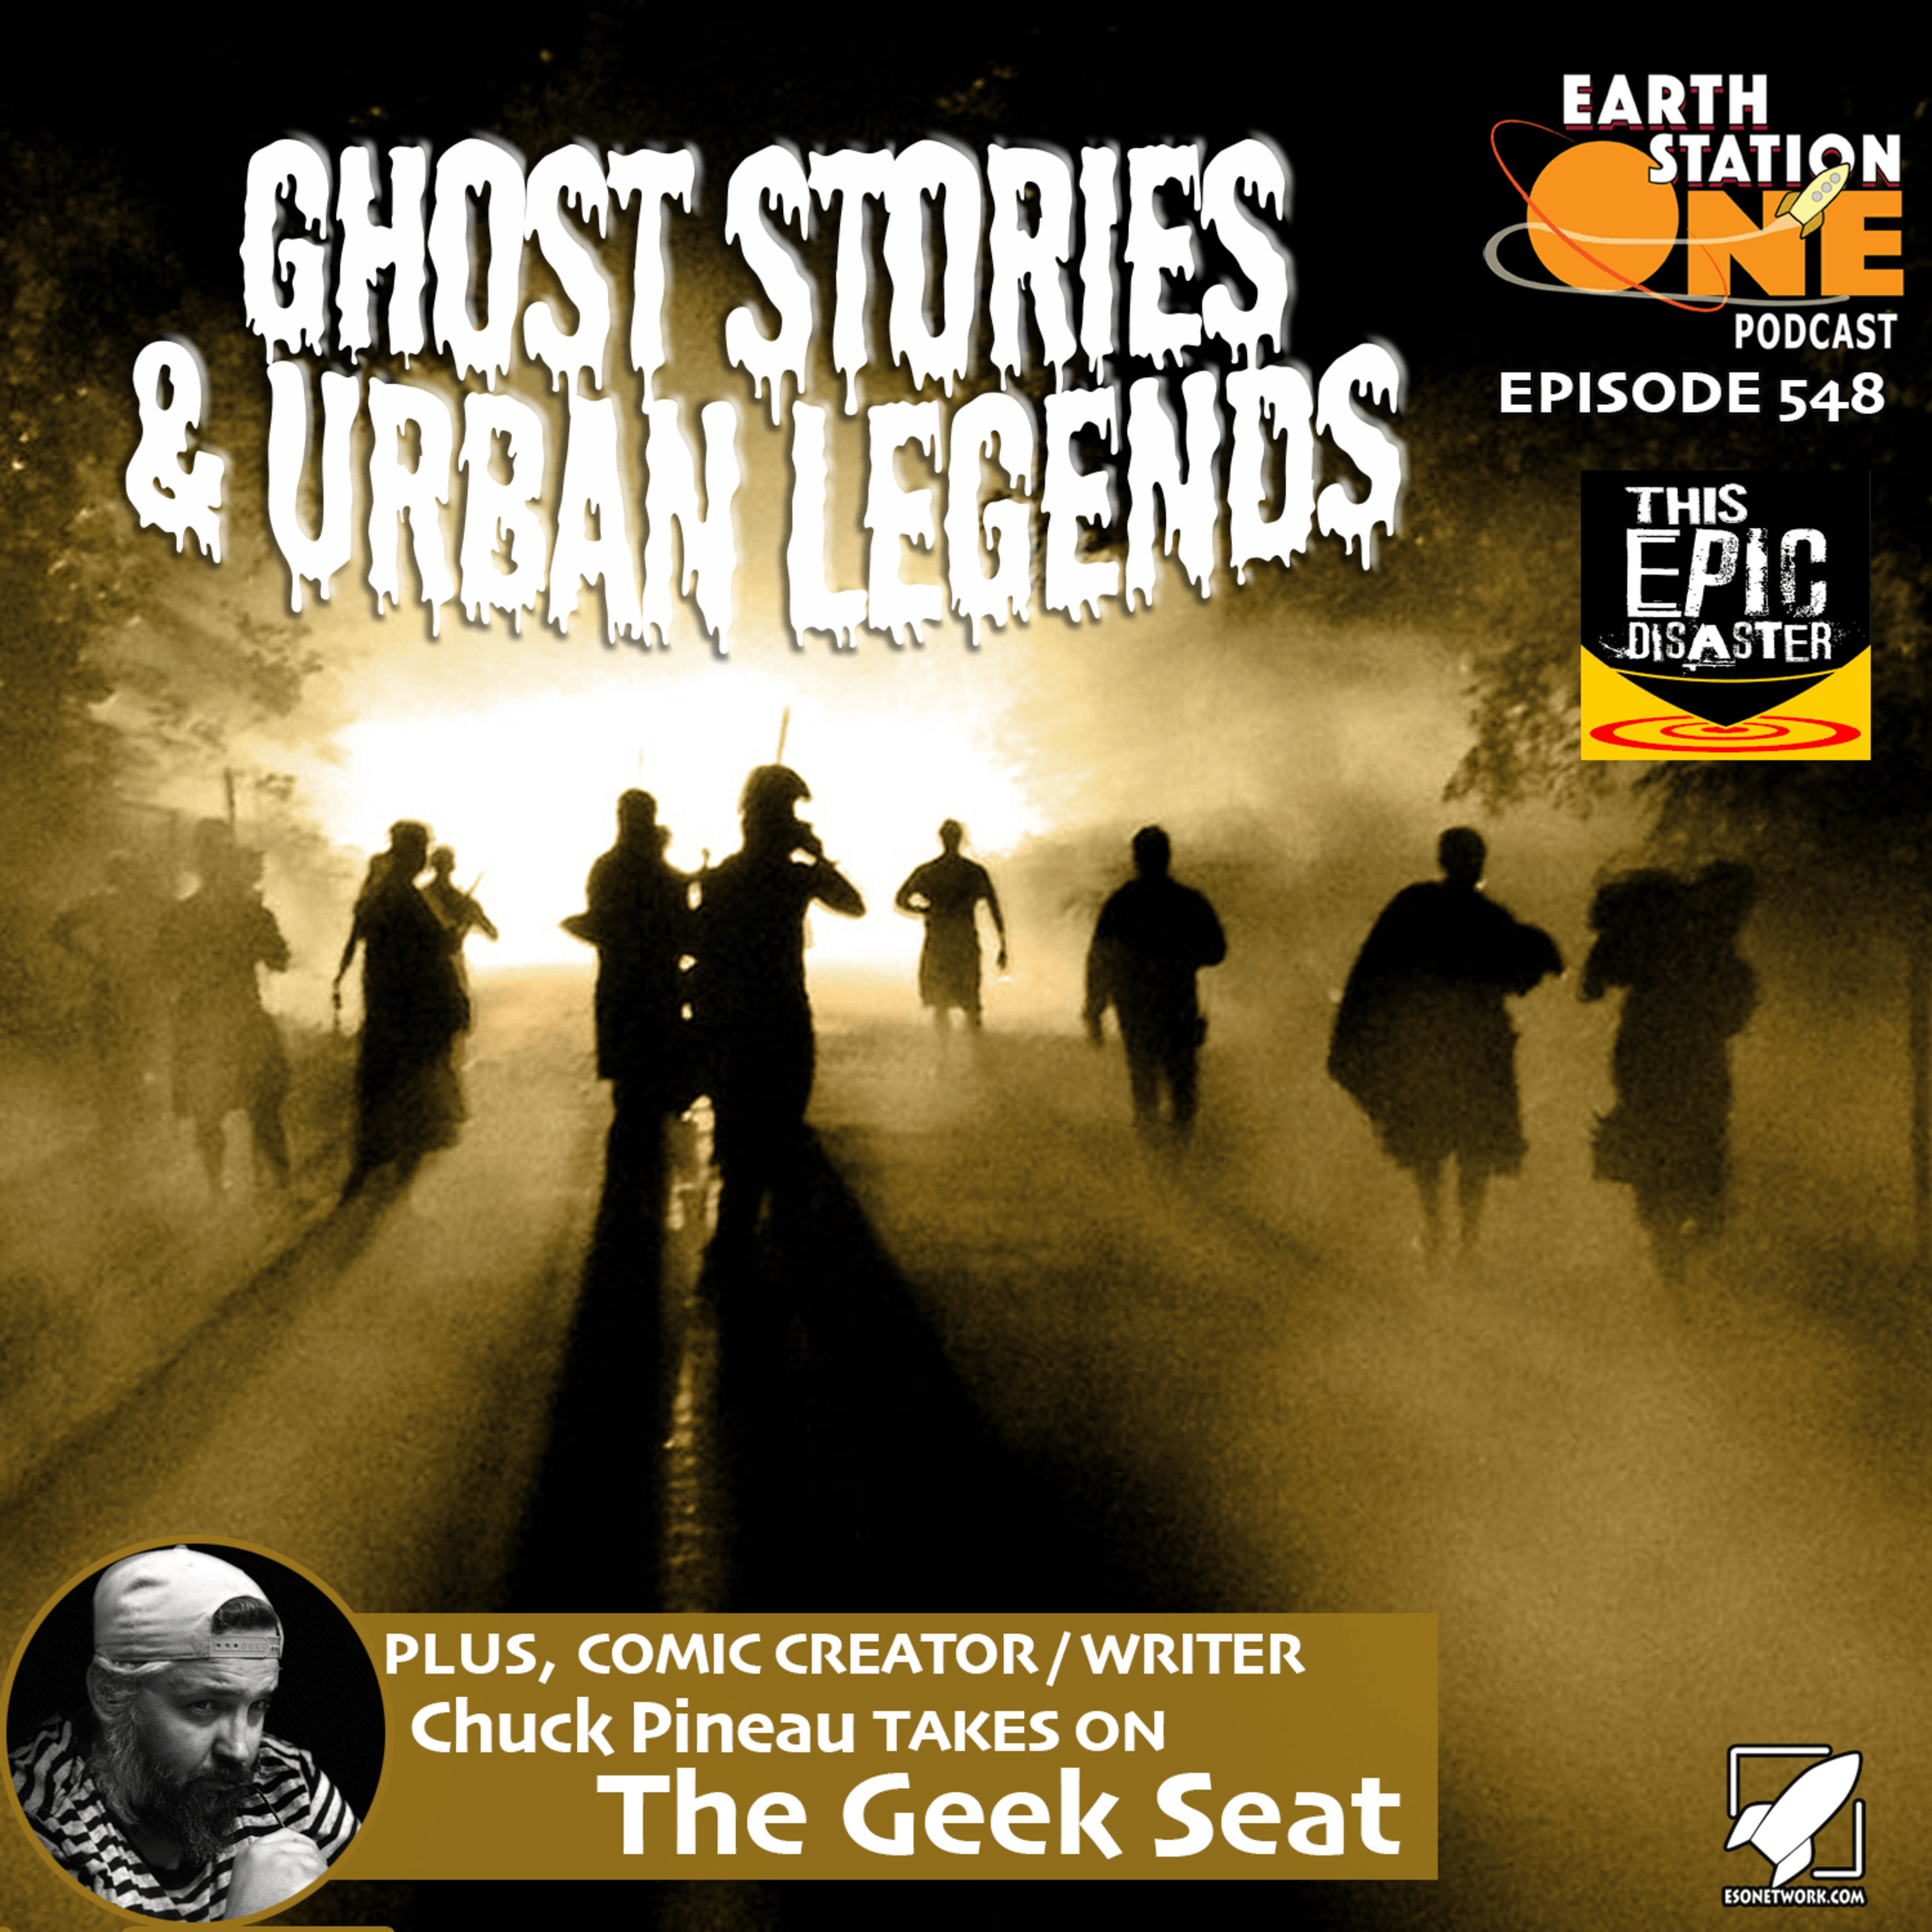 The Earth Station One Podcast - Ghost Stories and Urban Legends